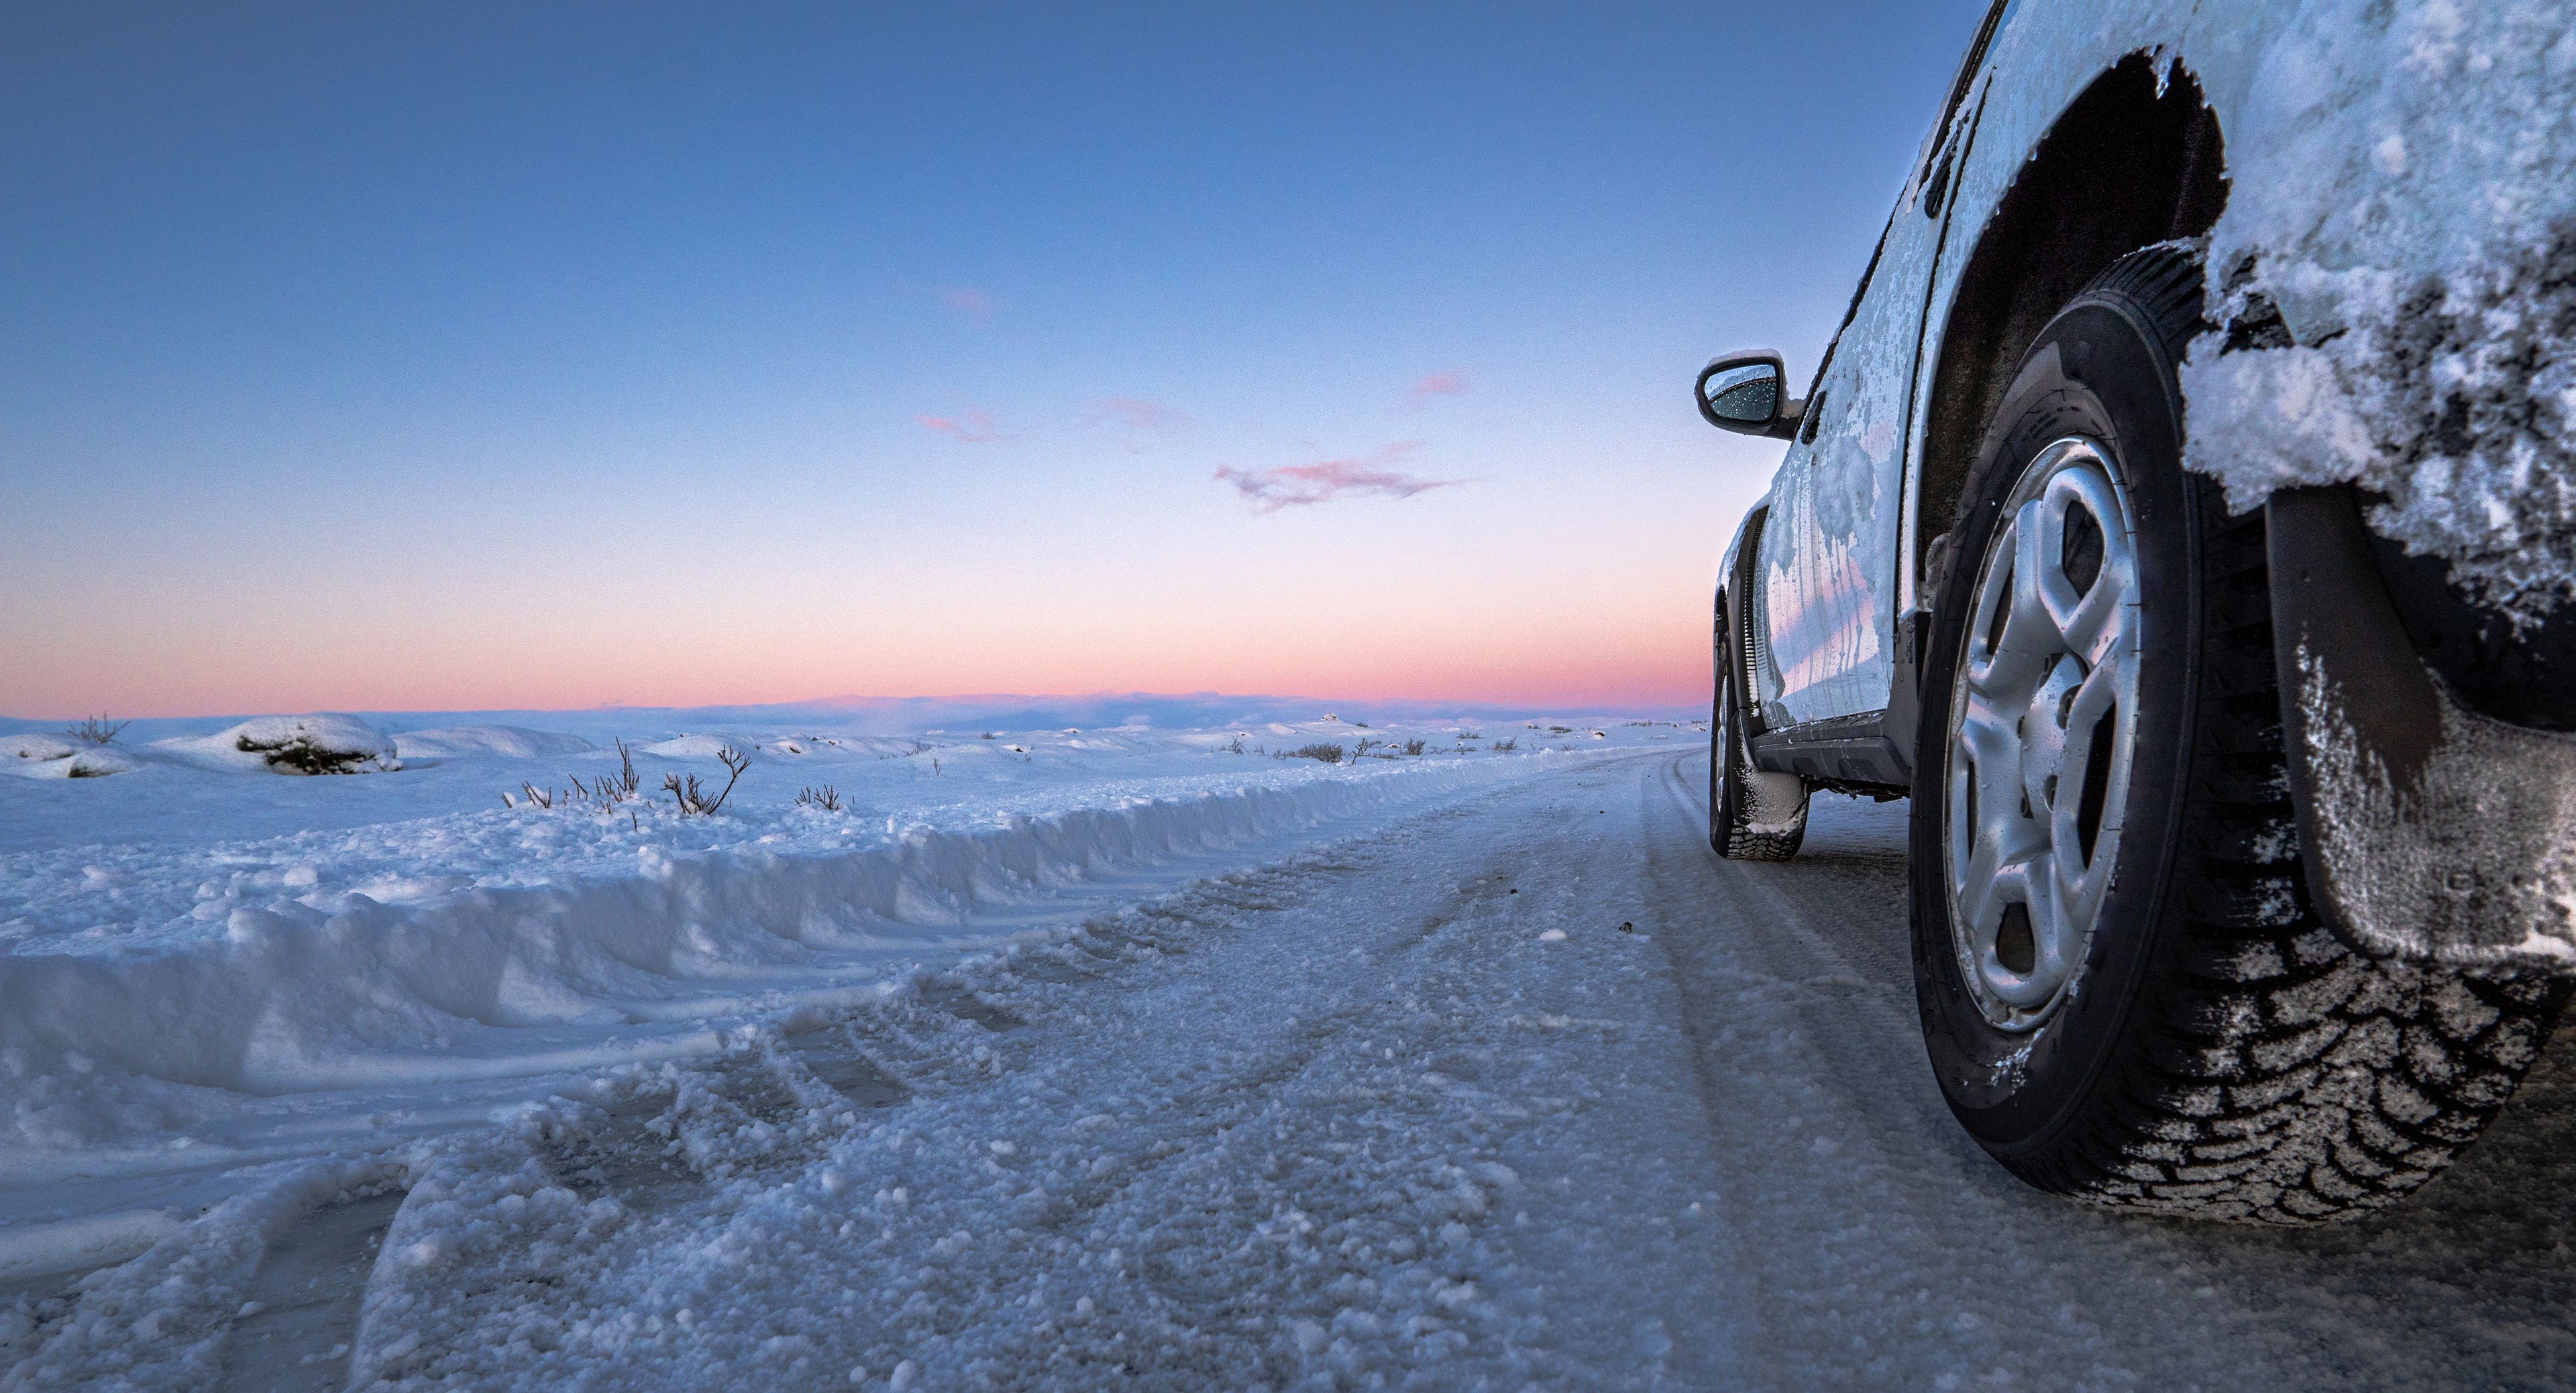 Sunset and car under the snow in Iceland